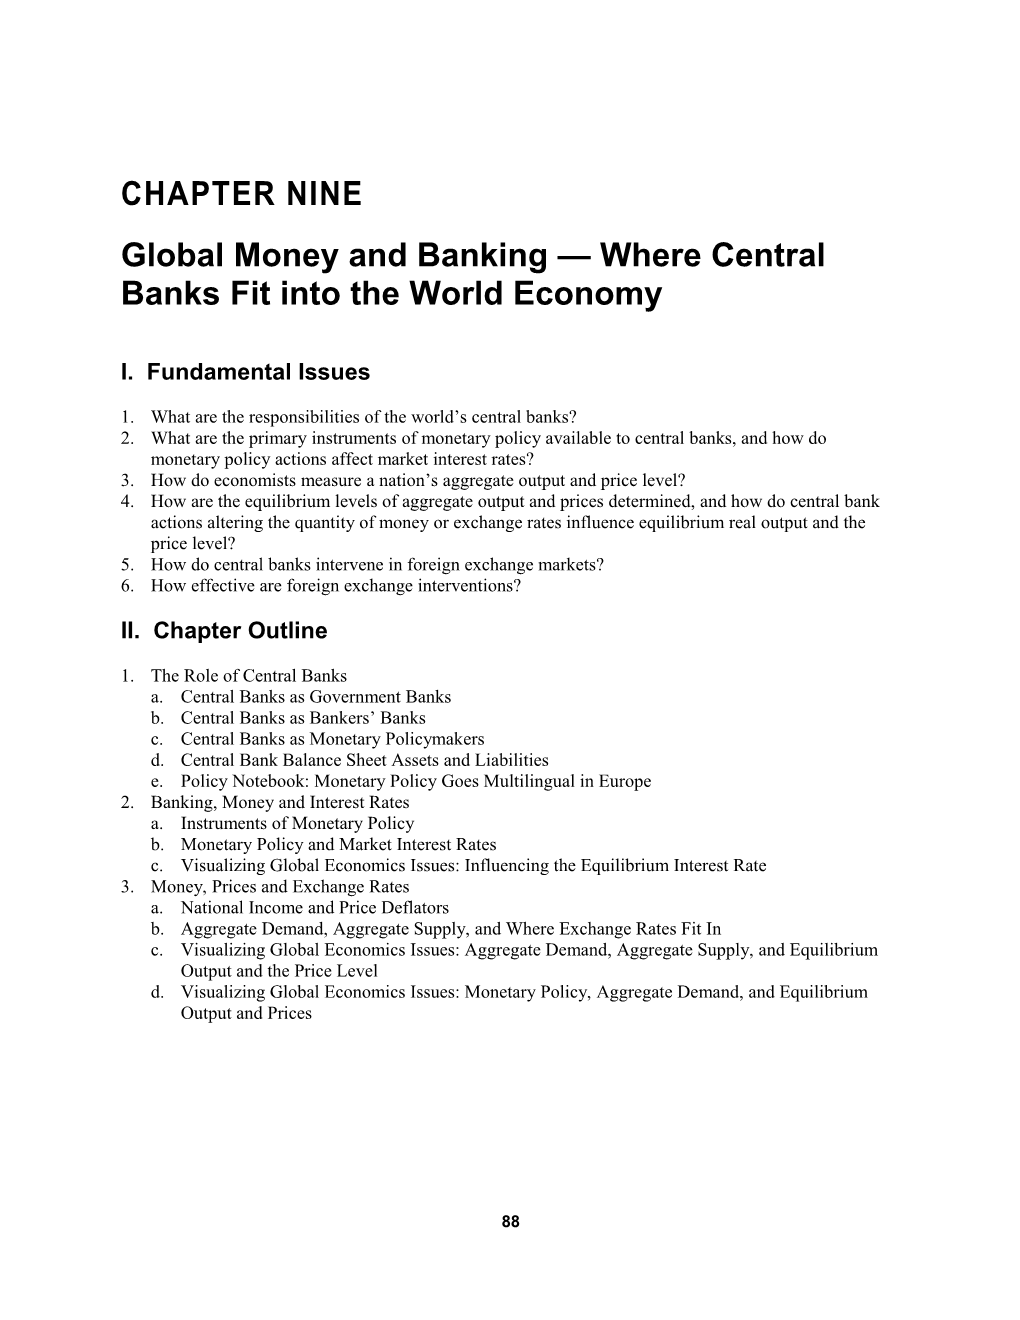 Global Money and Banking Where Central Banks Fit Into the World Economy1